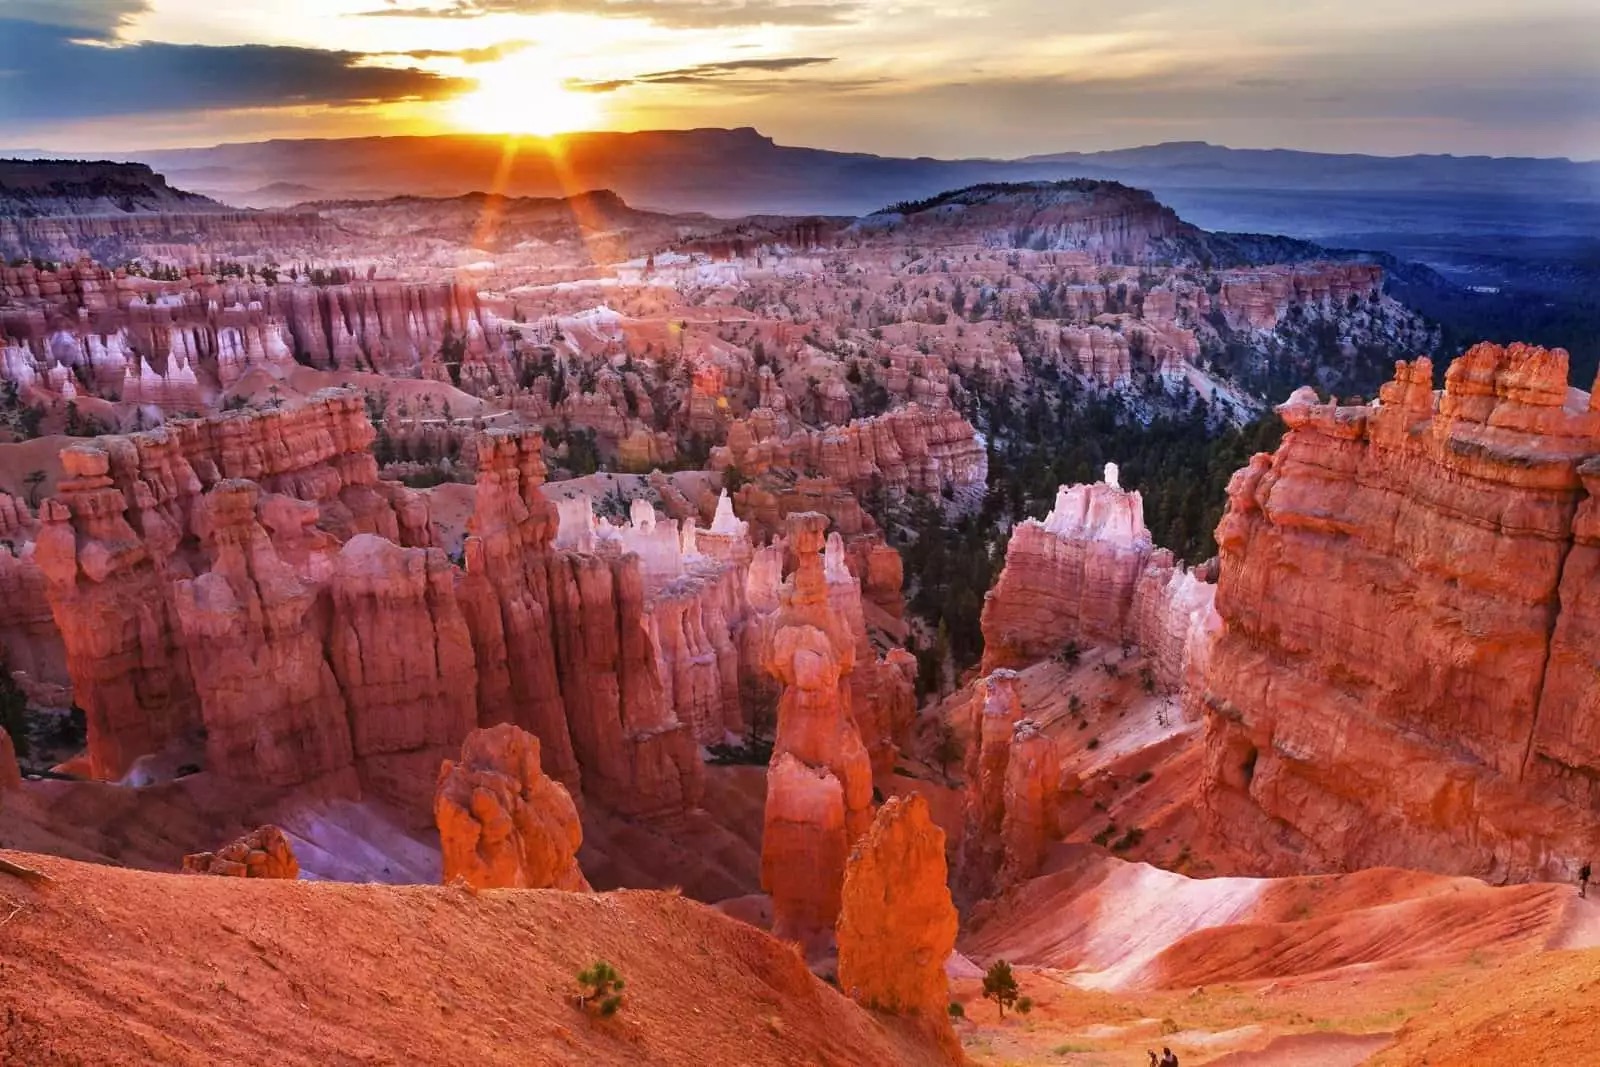 Here Are 24 Glorious Natural Attractions – Can You Match Them to Their Country? Bryce Canyon National Park, Utah, United States